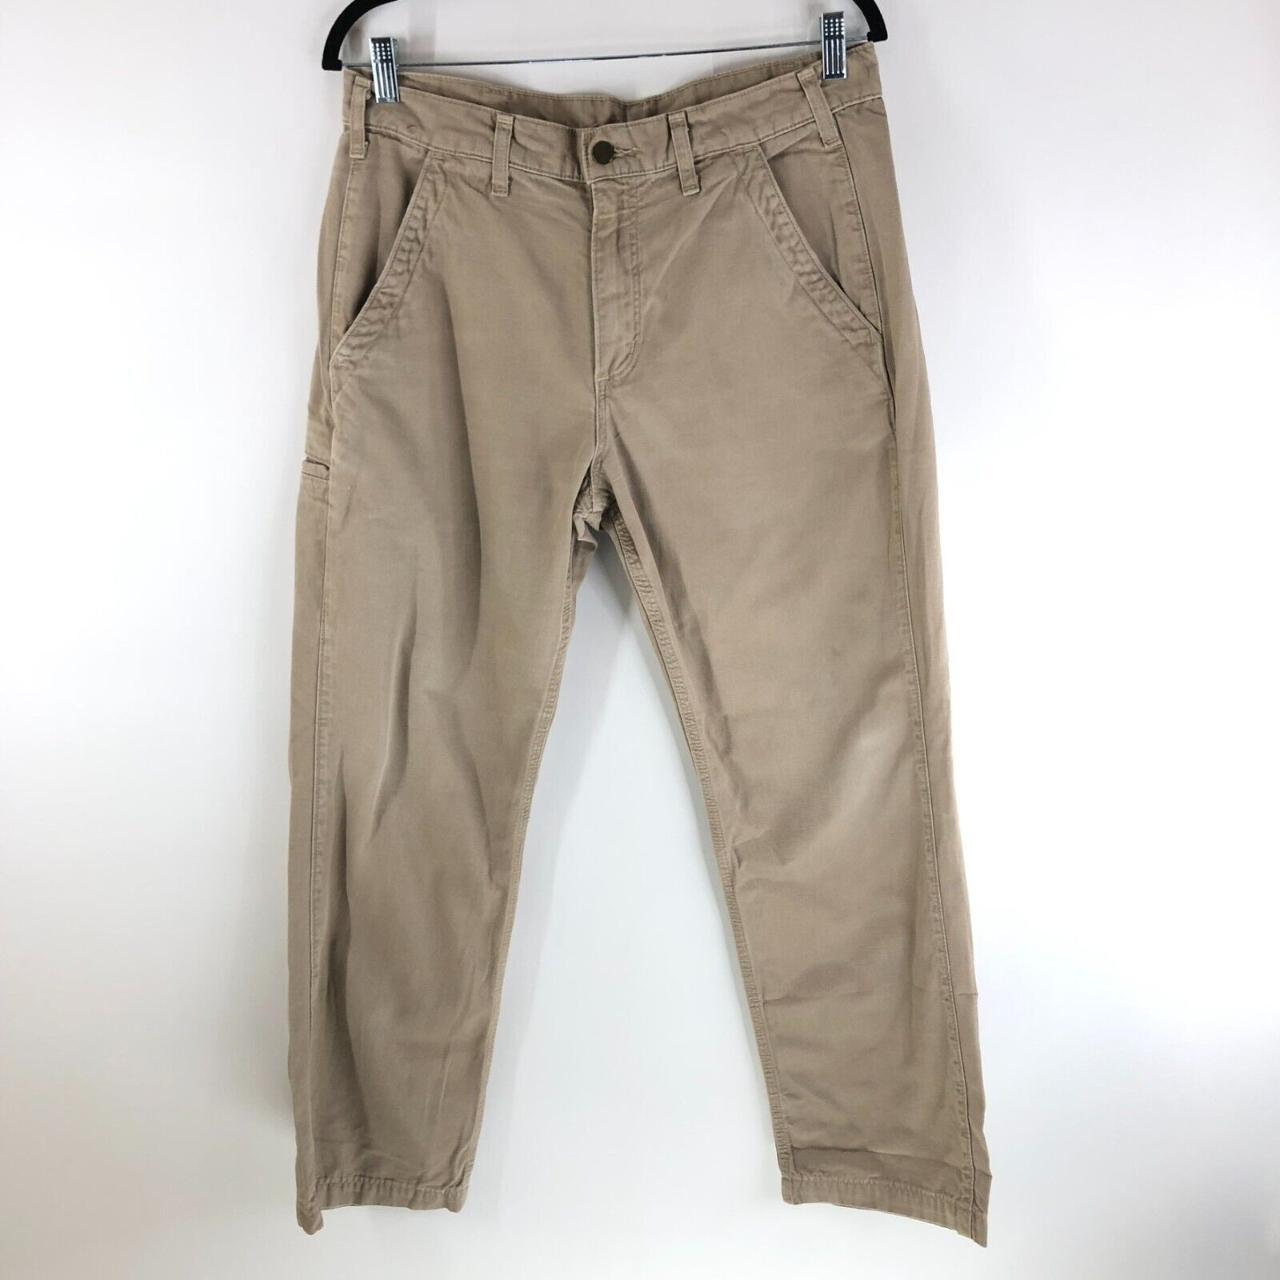 Carhartt Mens Pants Cargo Relaxed Fit Cotton Canvas - Depop